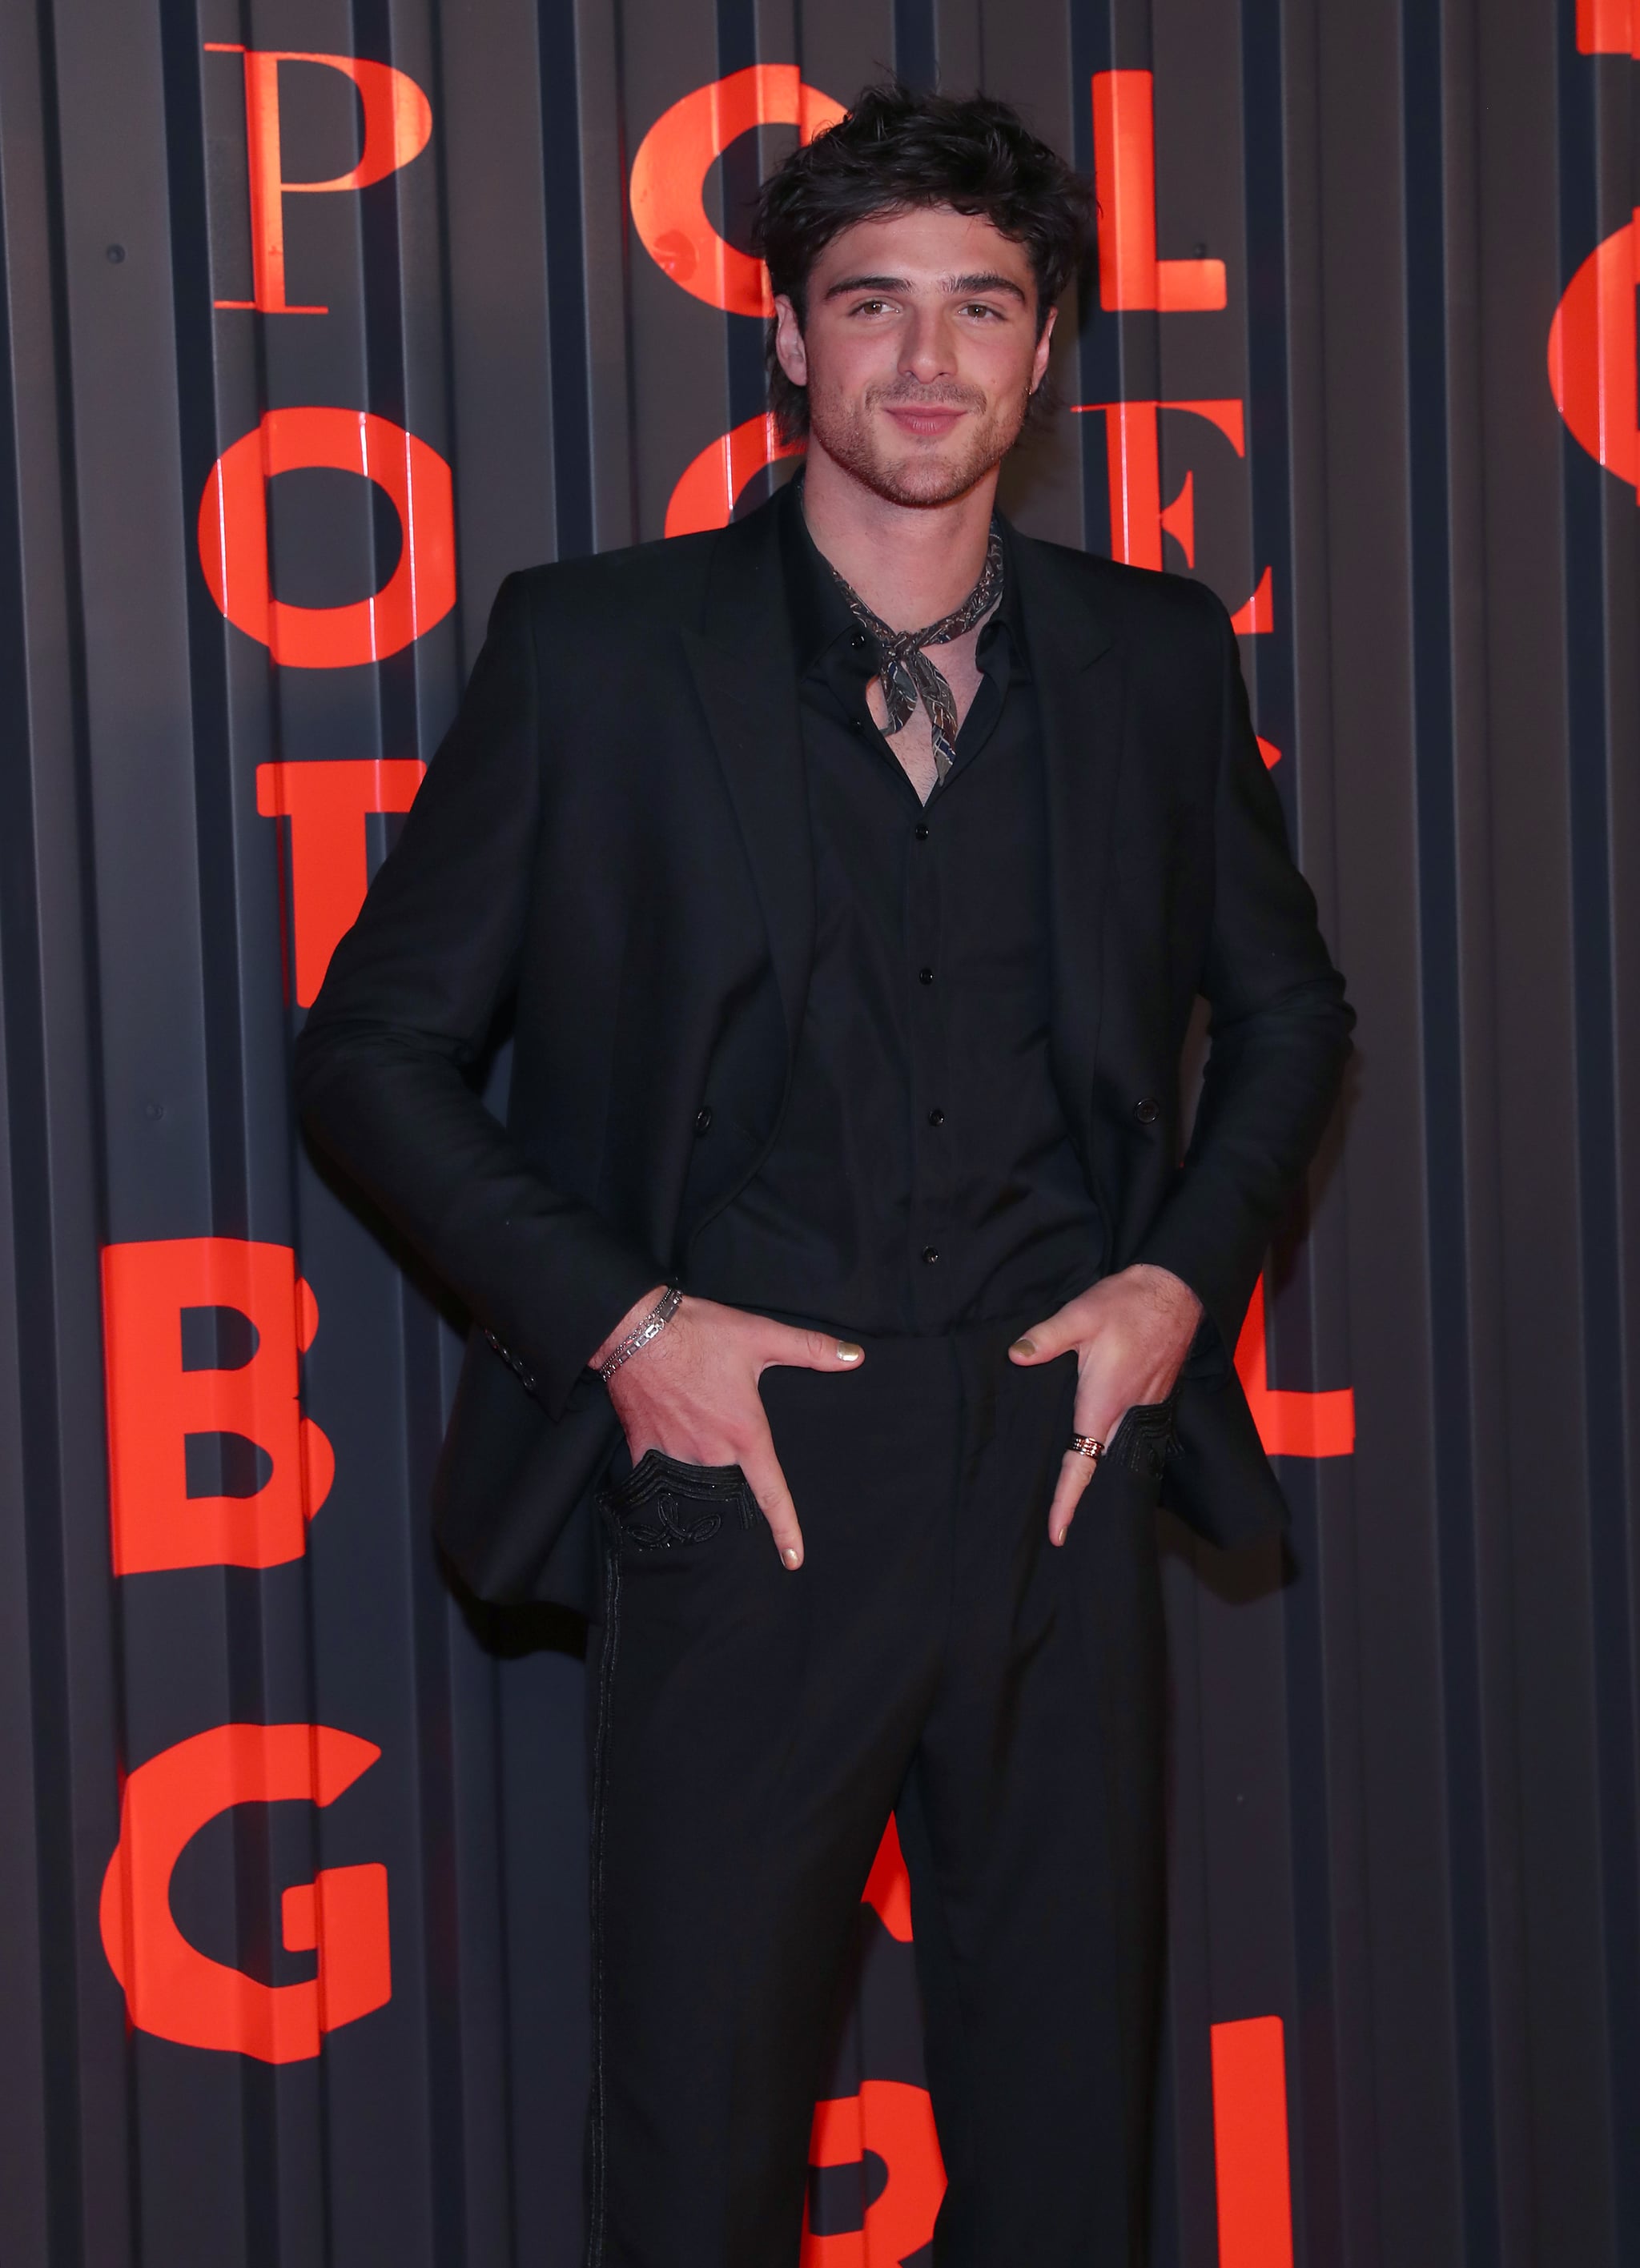 Jacob Elordi at the Bulgari Party at New York Fashion Week | Your Guide to  What A-List Celebrities Are Wearing to 2020's Fall Fashion Week | POPSUGAR  Fashion Photo 221